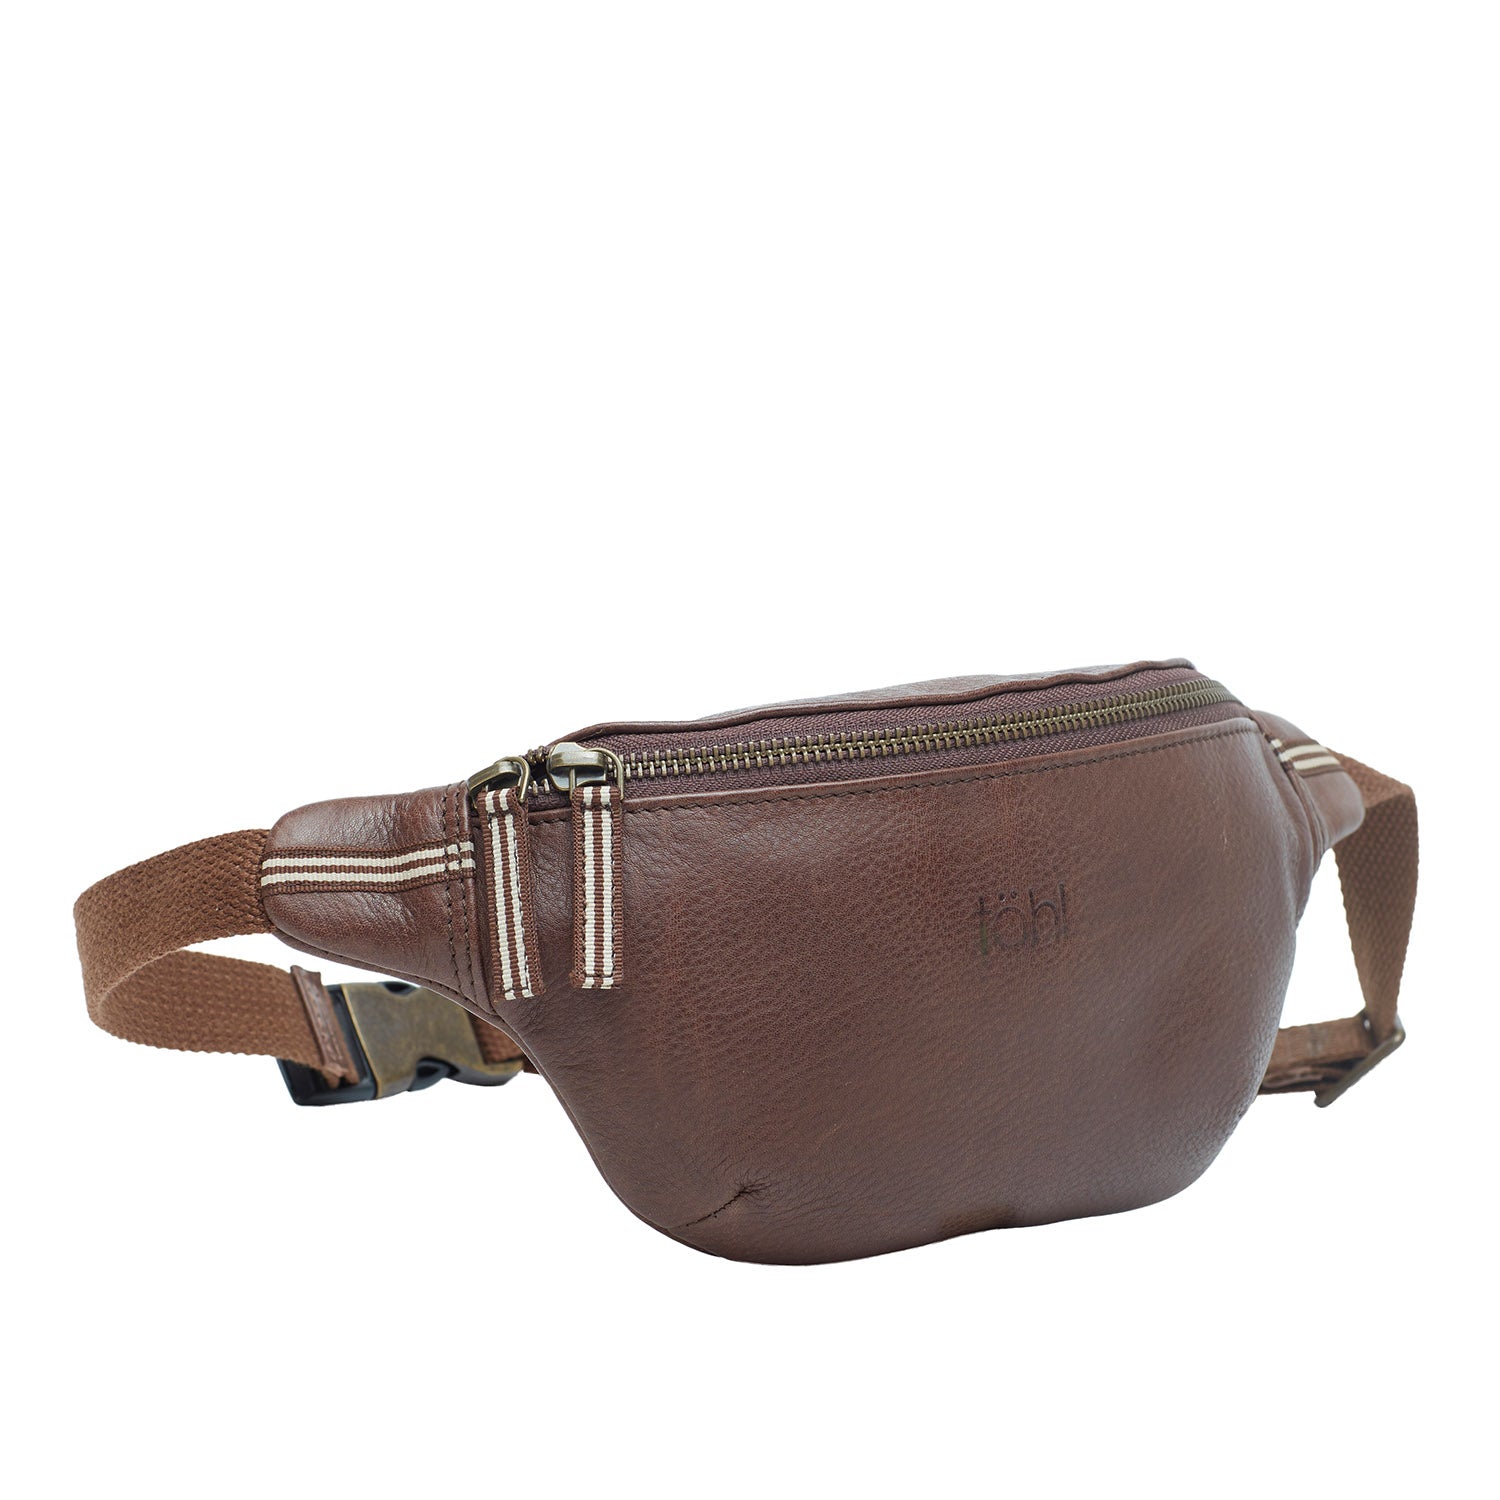 Buy 3in1 Camel Leather Bum Bag Women Leather Crossbody Bag Slouchy Leather  Bag Large Leather Fanny Pack Large Leather Waist Bag for Travel Online in  India - Etsy